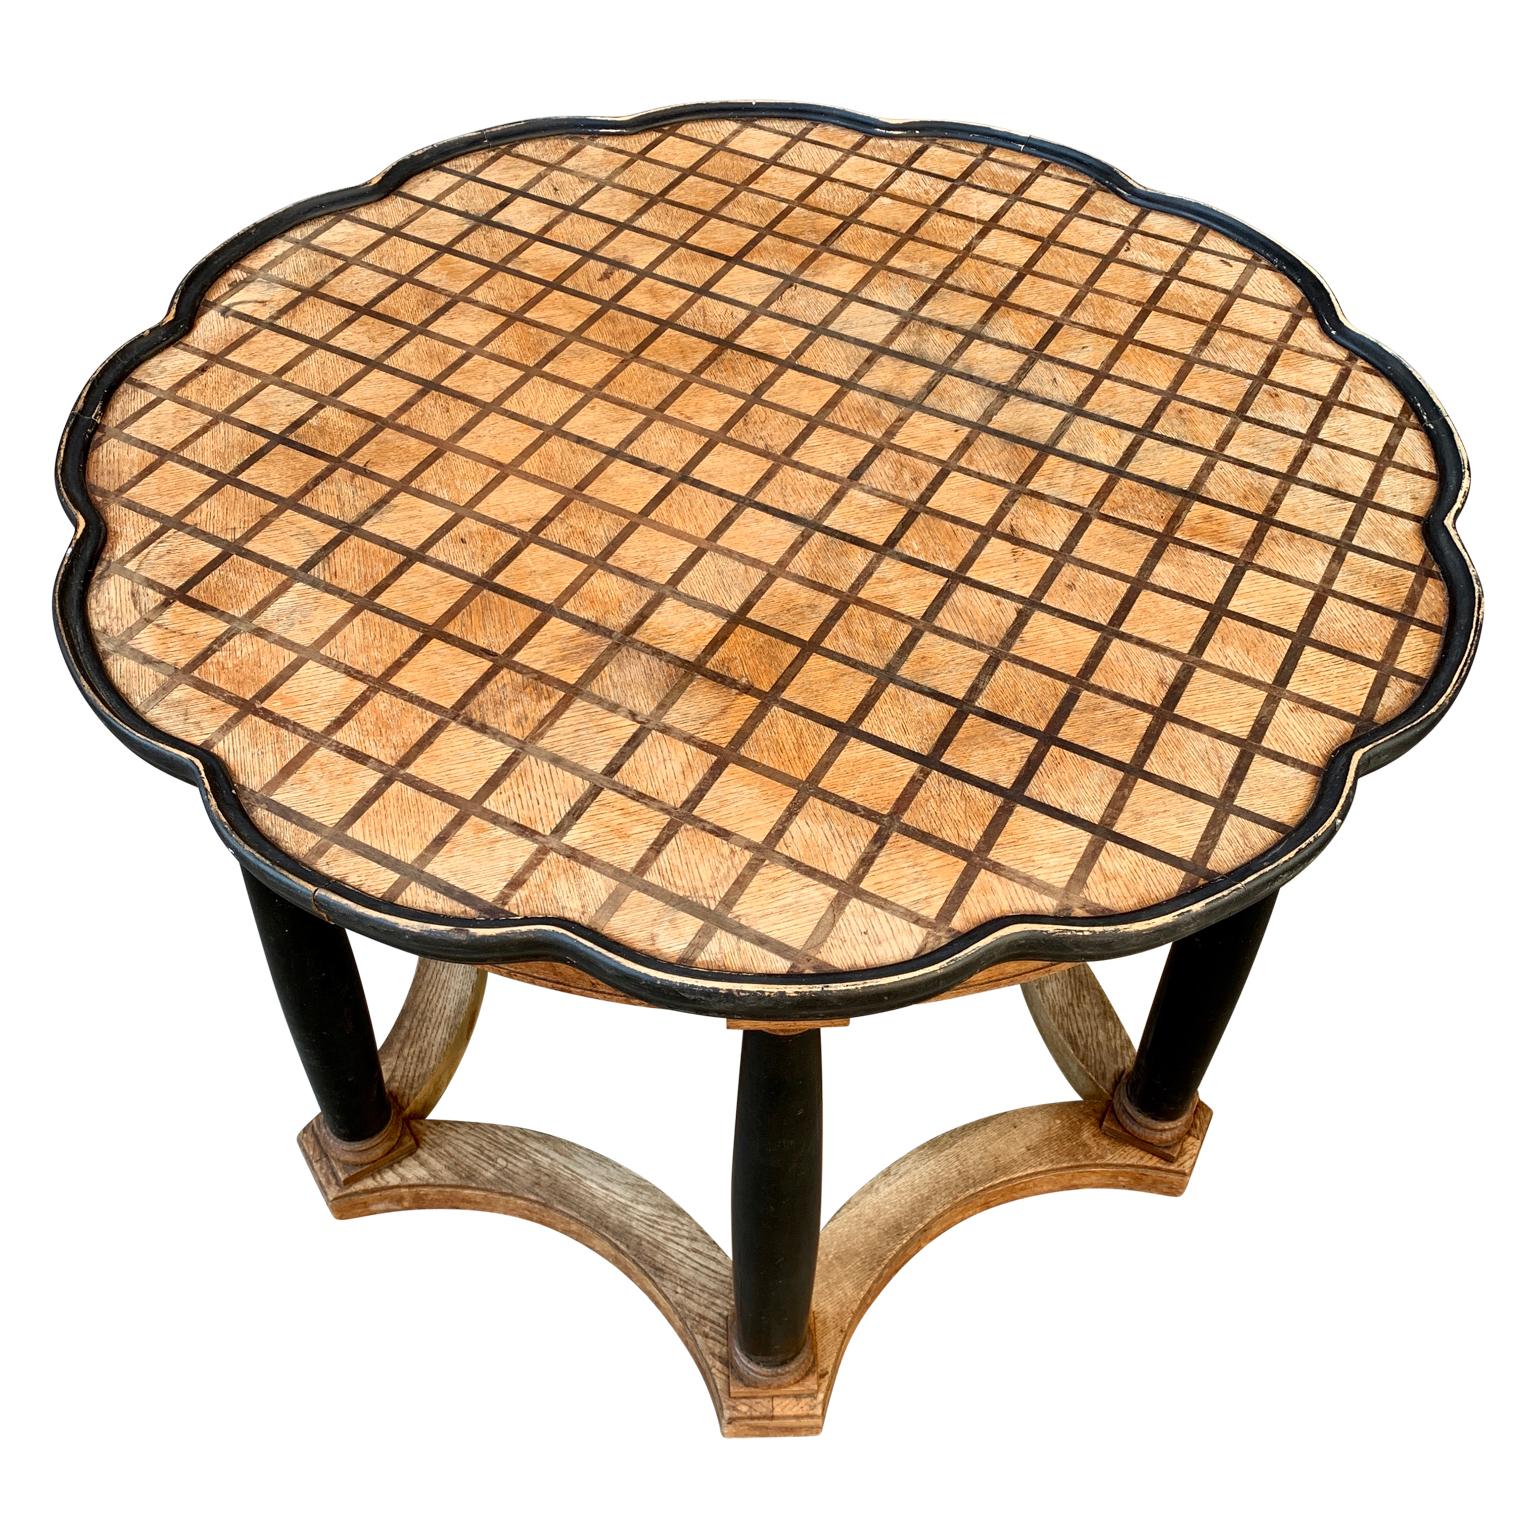 Scandinavian Art Deco cocktail table in both dark and light intarsia inlay of oak wood. Intarsia woods are fields of different colors and materials which appear to be inlaid in one another, fitting together like a jigsaw puzzle. The black painted